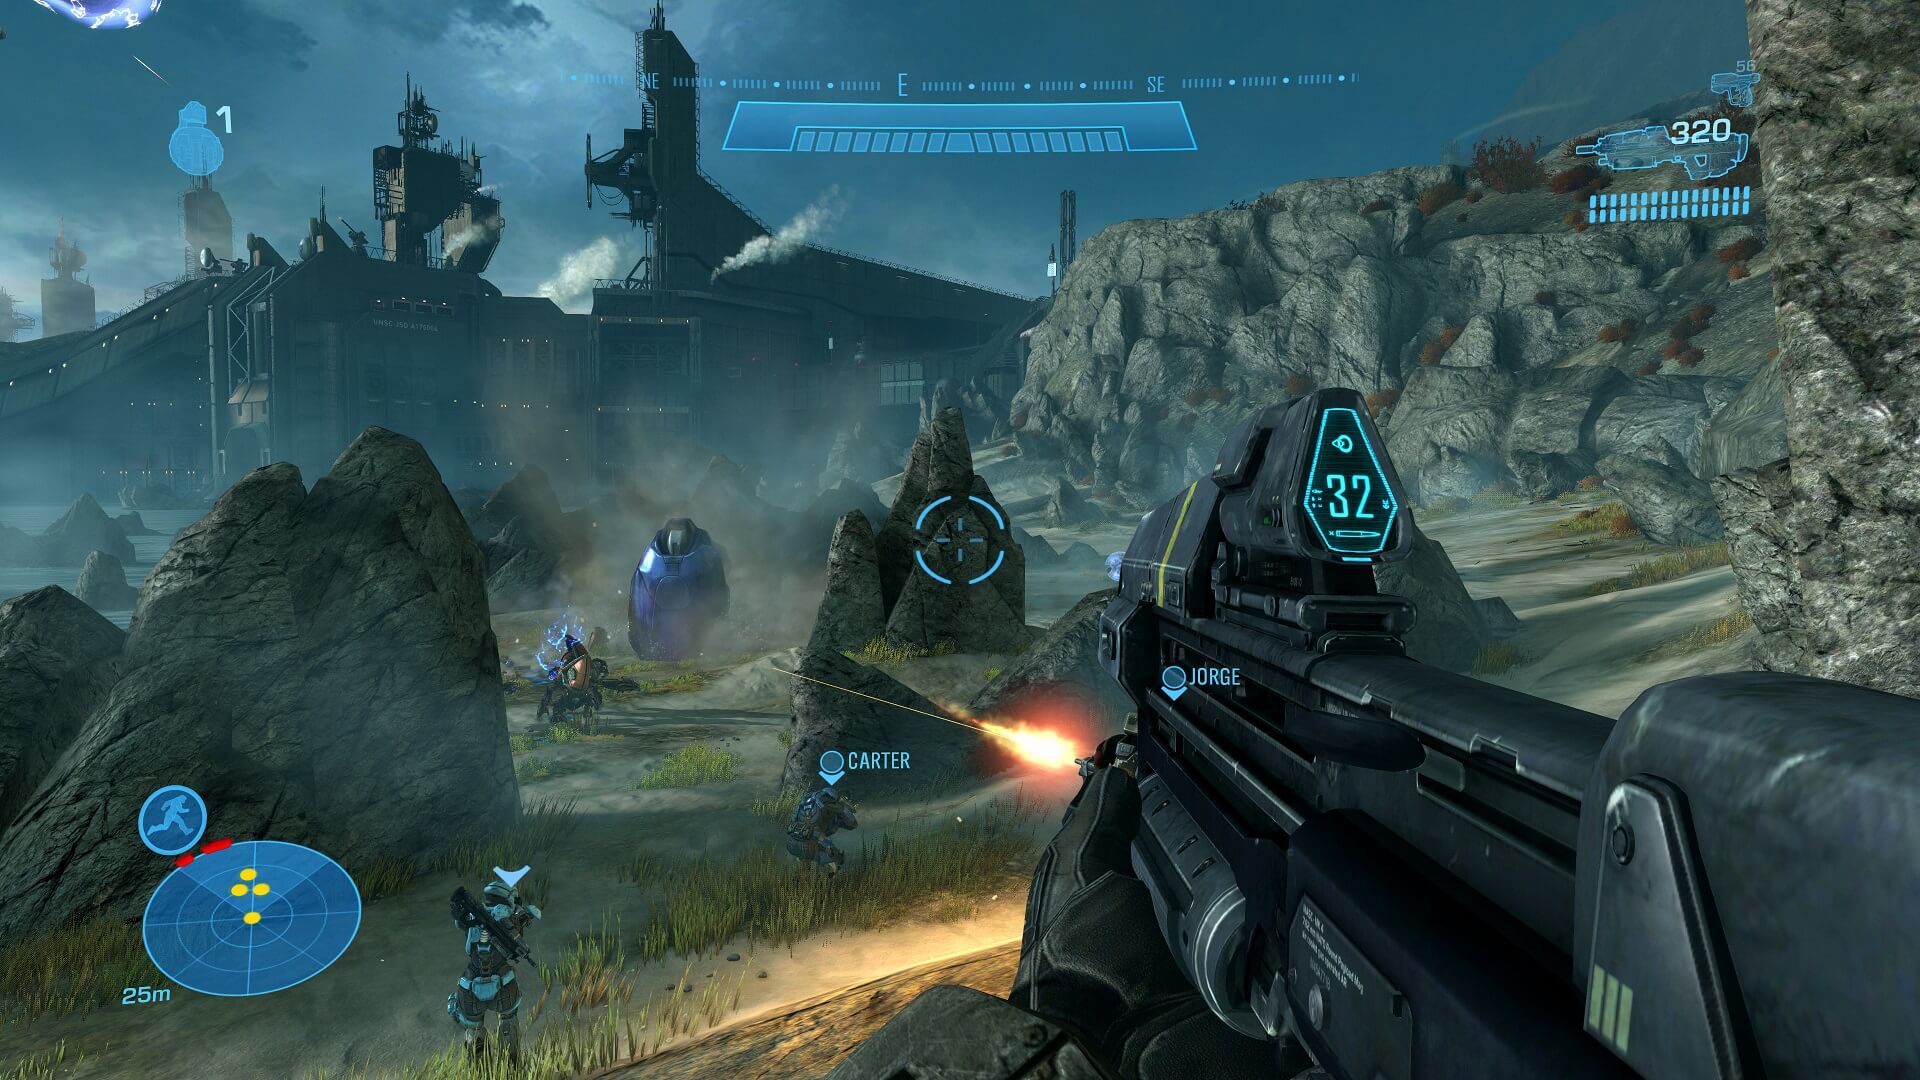 A battle with the Covenant in Halo: The Master Chief Collection